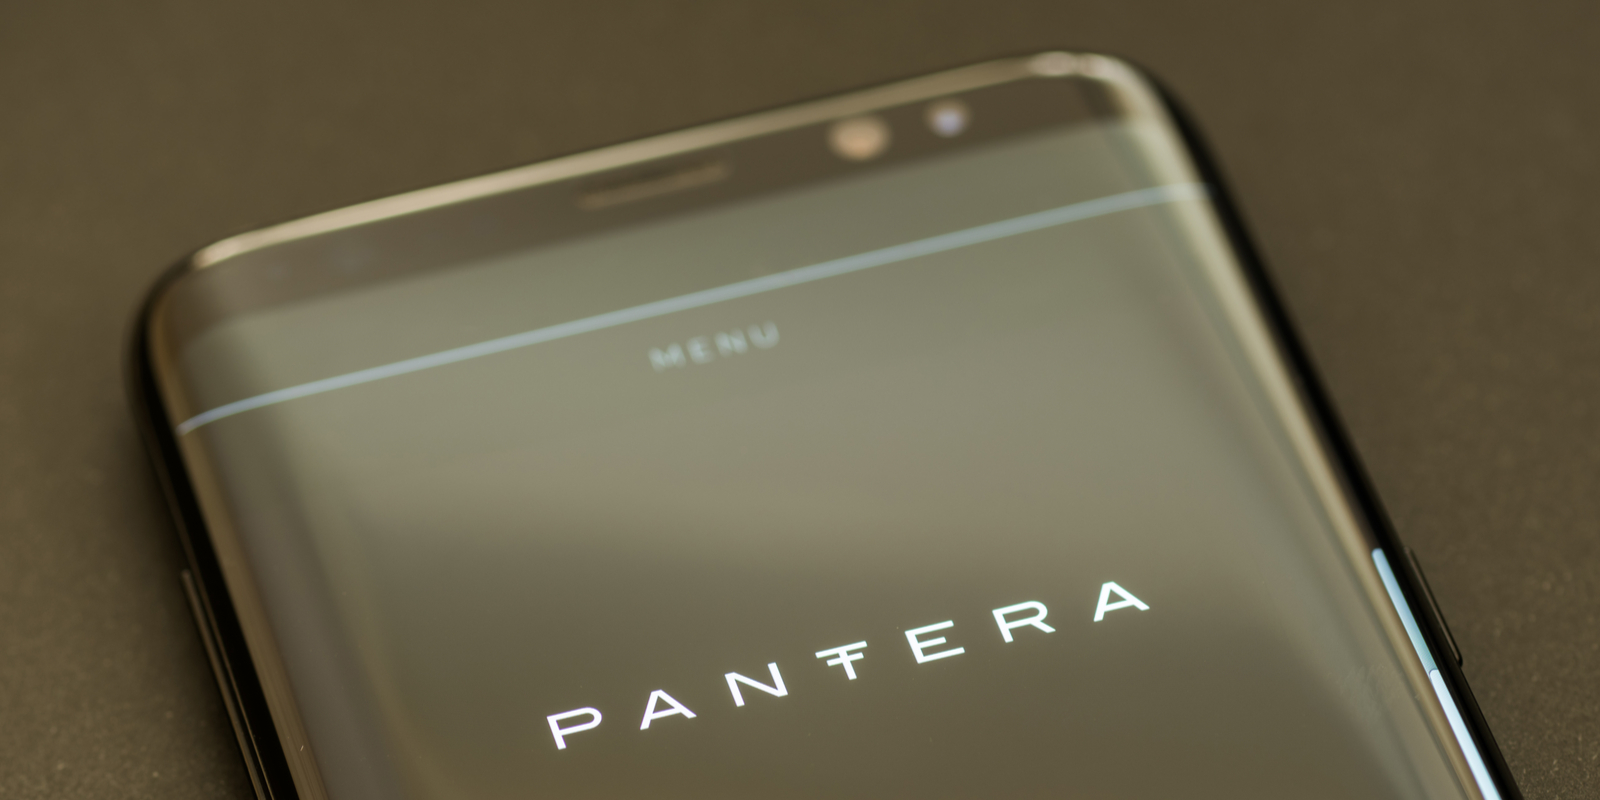 Pantera Predicts Institutions to Invest in Crypto After Next Bull Trend is Established